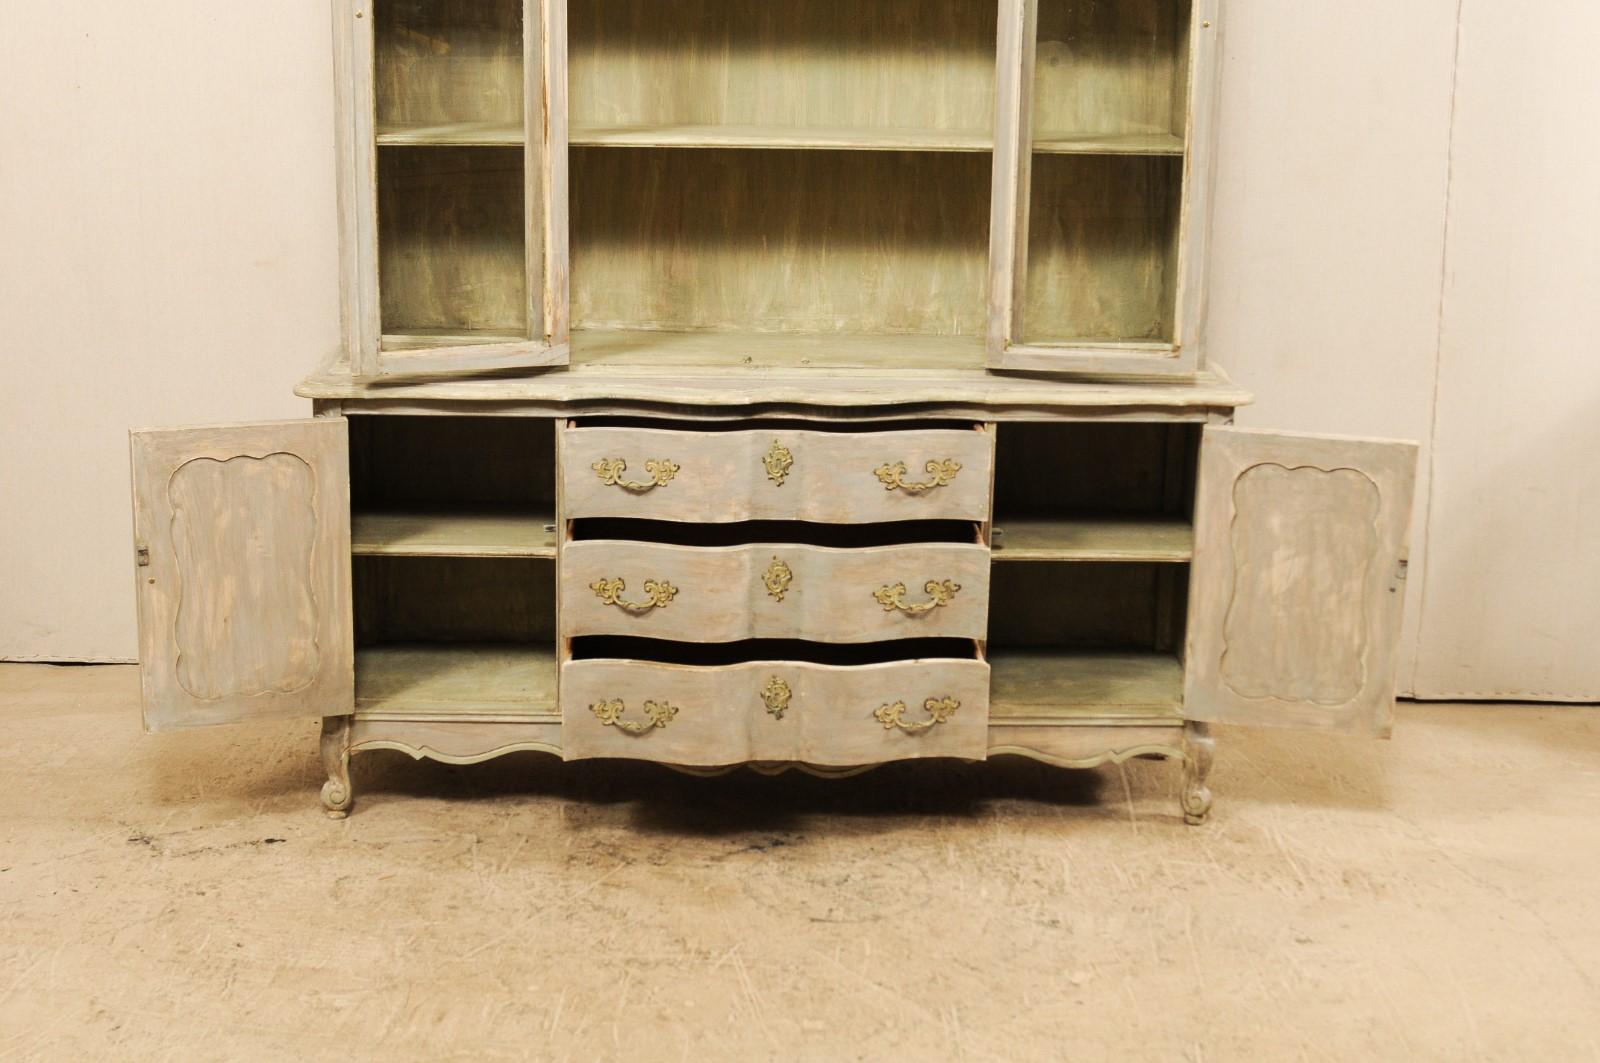 French Style Mid-20th Century Wood and Glass Display and Storage Cabinet (20. Jahrhundert)